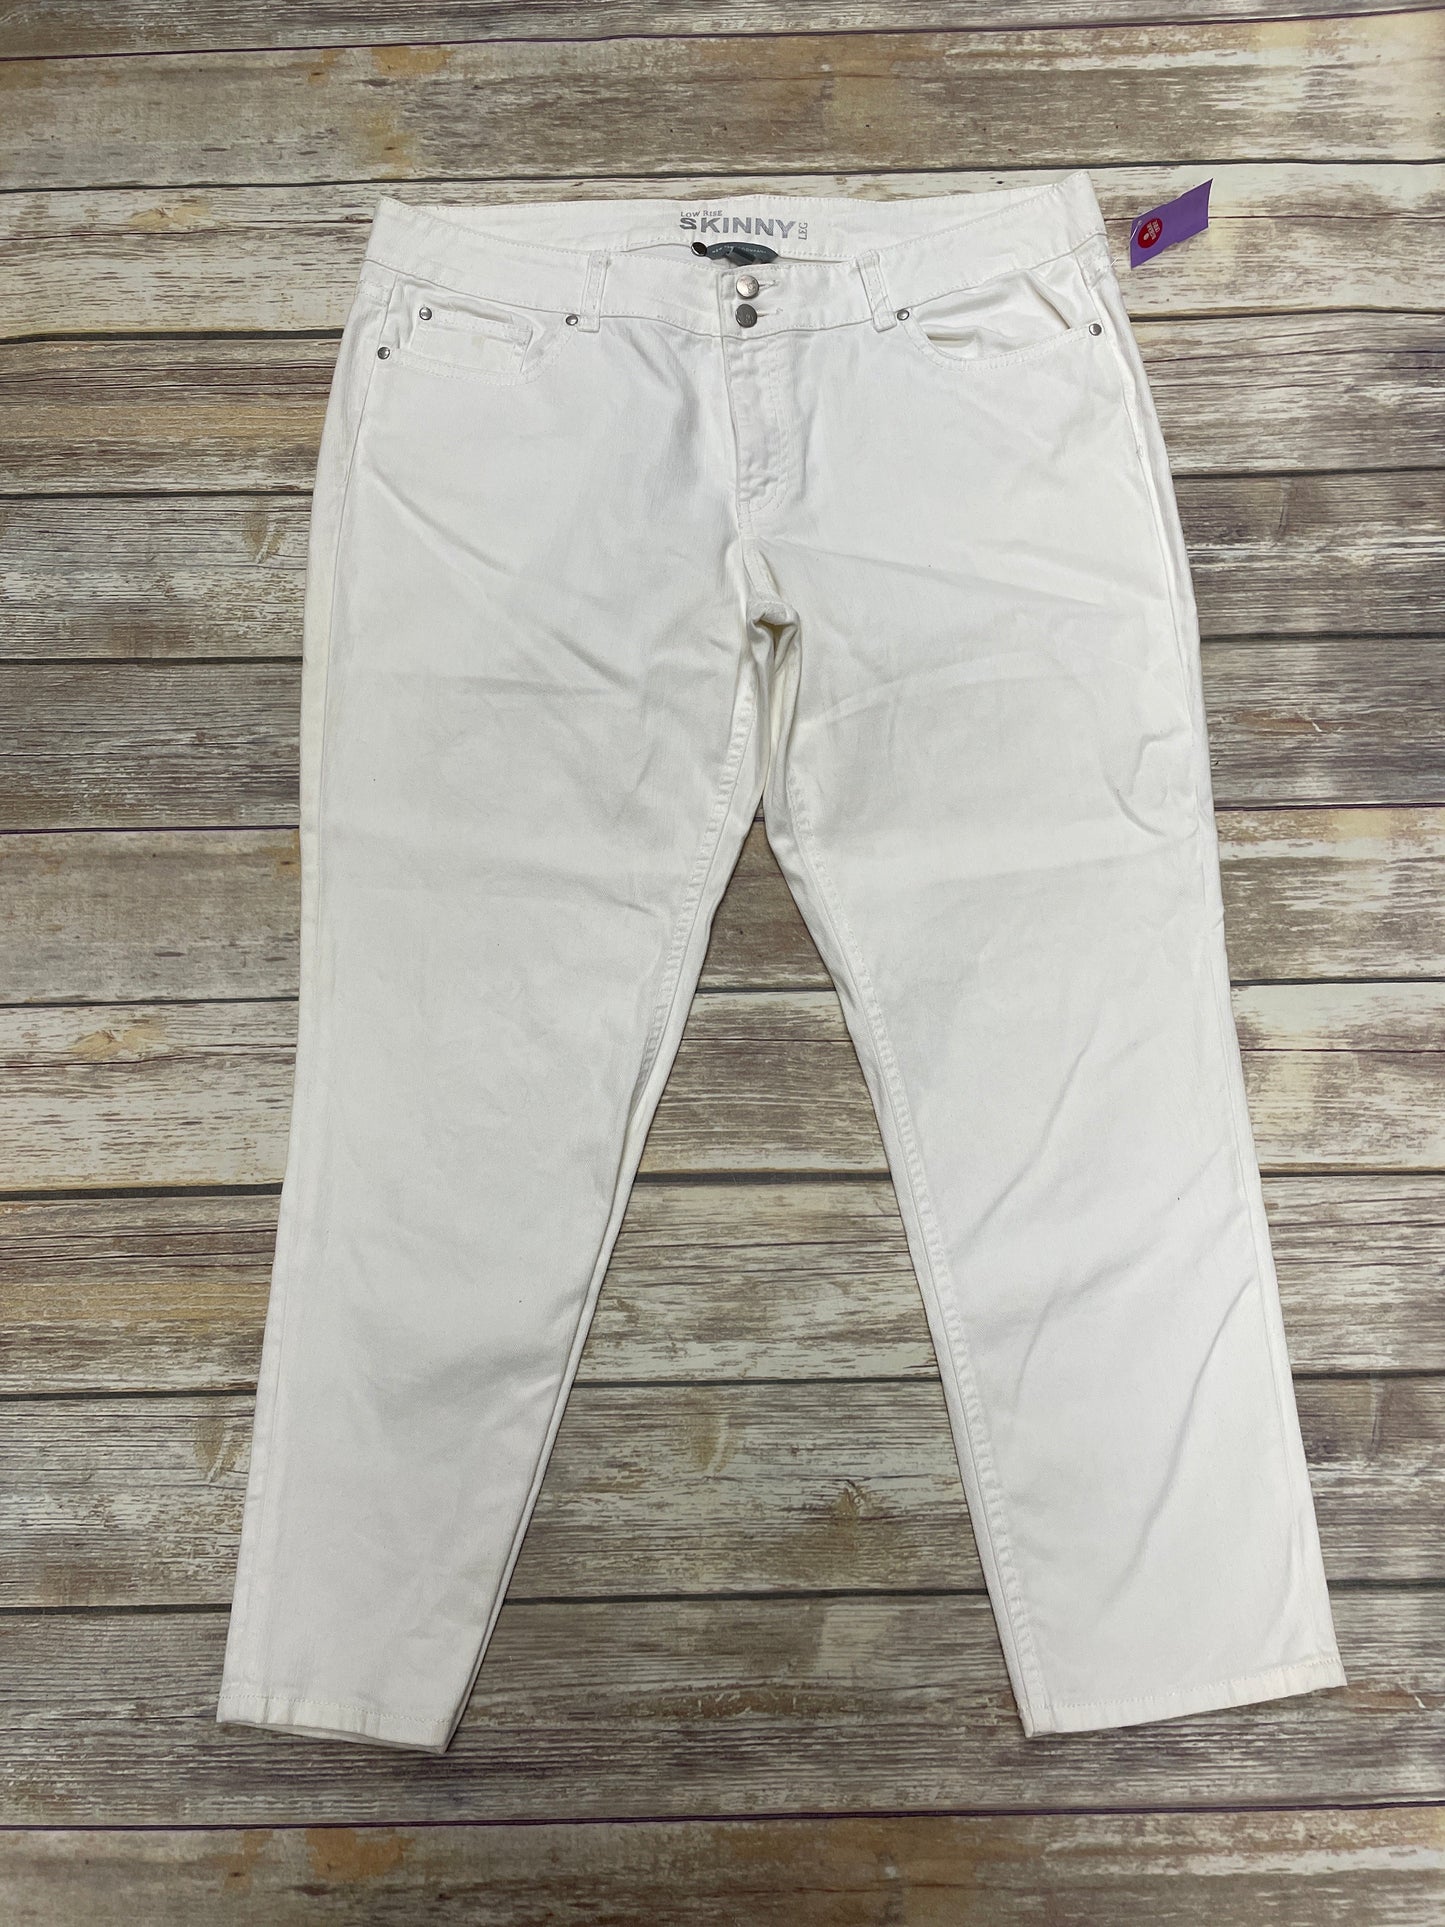 Cream Jeans Skinny New York And Co, Size 14